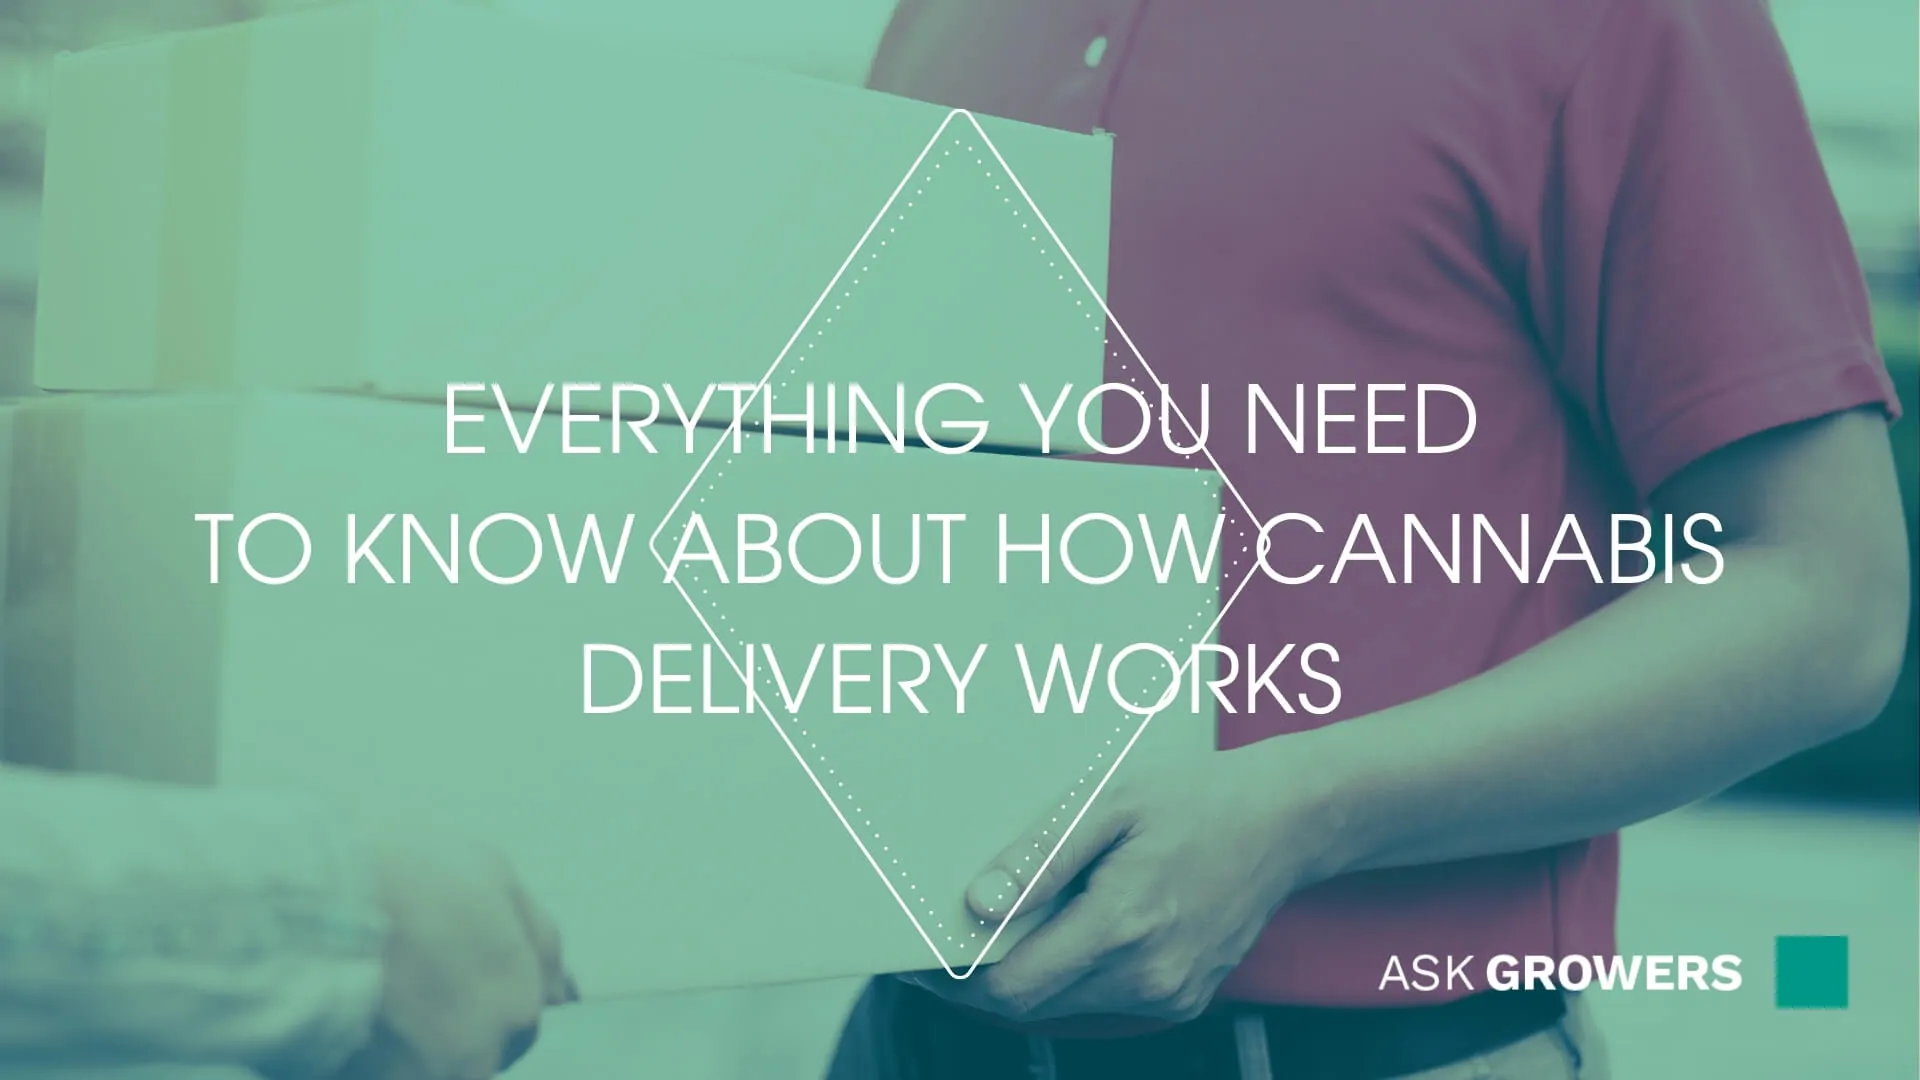 Everything You Need to Know About How Cannabis Delivery Works